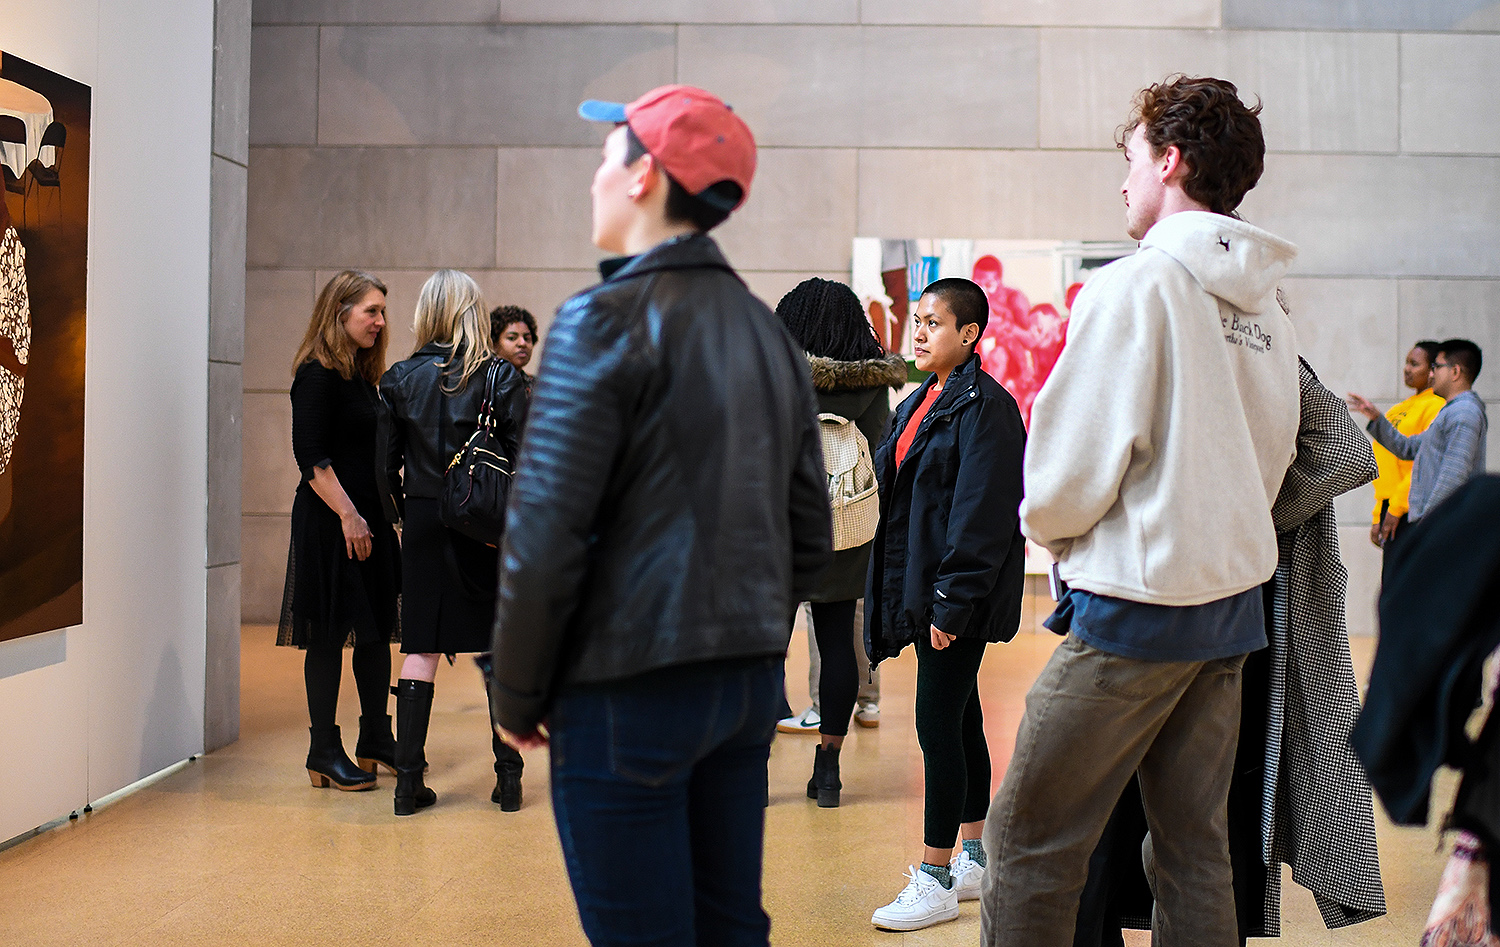 Seniors in the Department of Art and Art History's Art Studio Program are displaying their work throughout the month of April in Zilkha Gallery